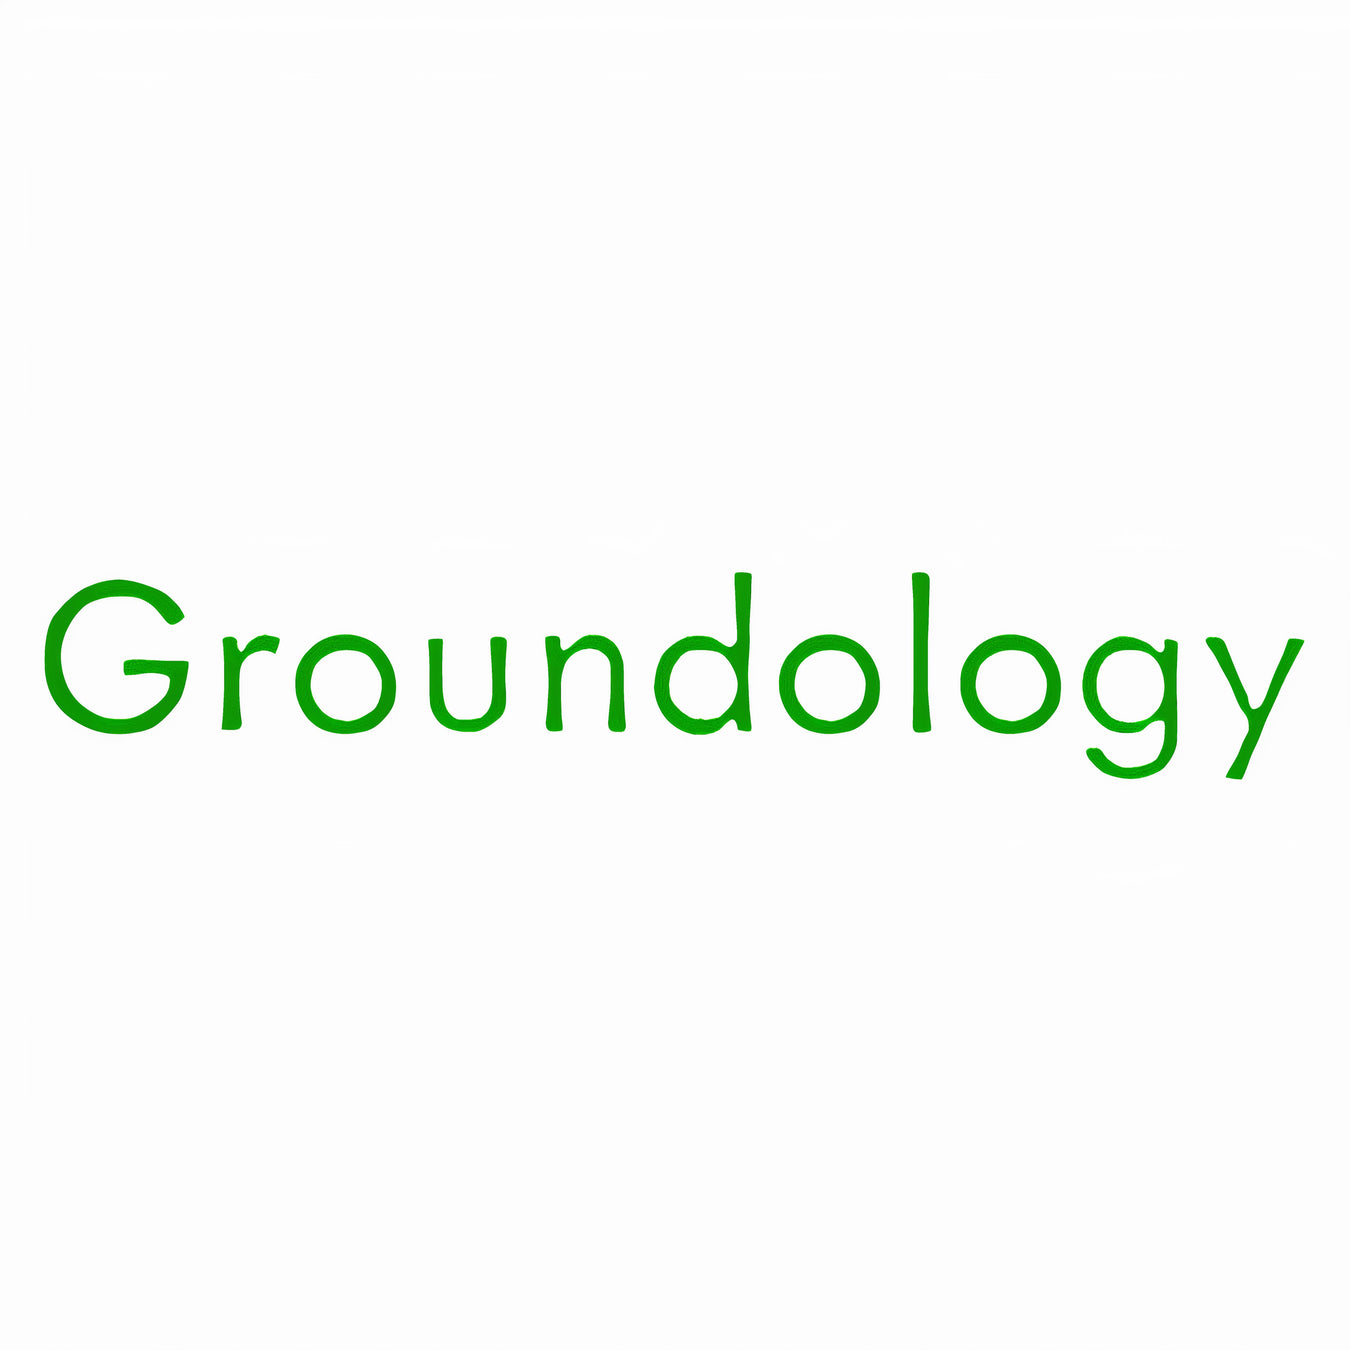 A logo for Groundology. It is green in colour.